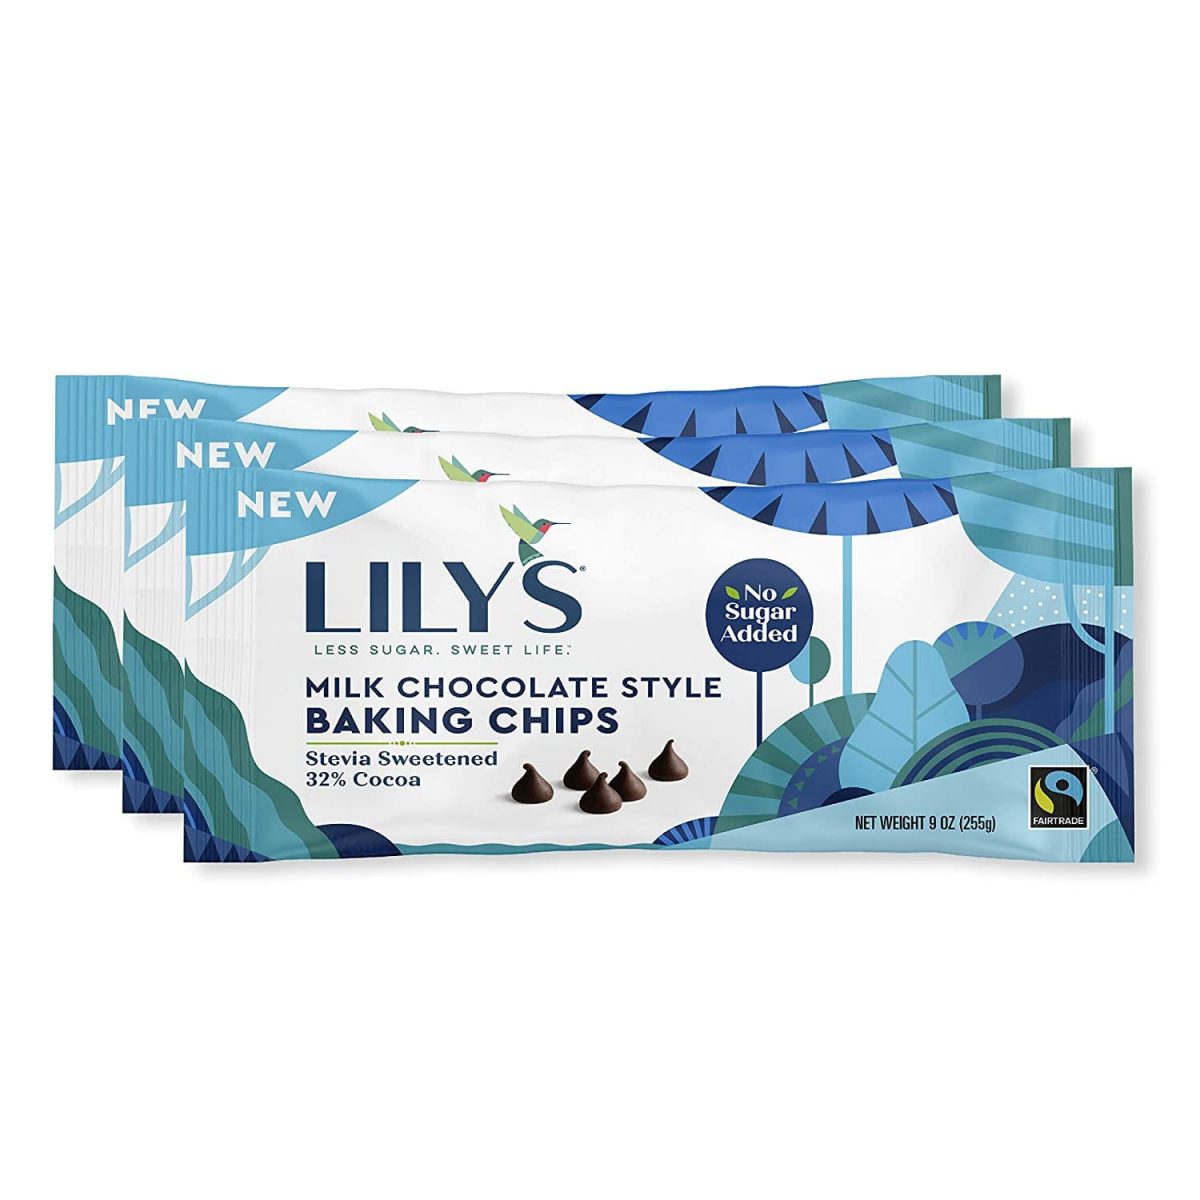 Milk Chocolate Baking Chips By Lily's | Stevia Sweetened, No Added Sugar
